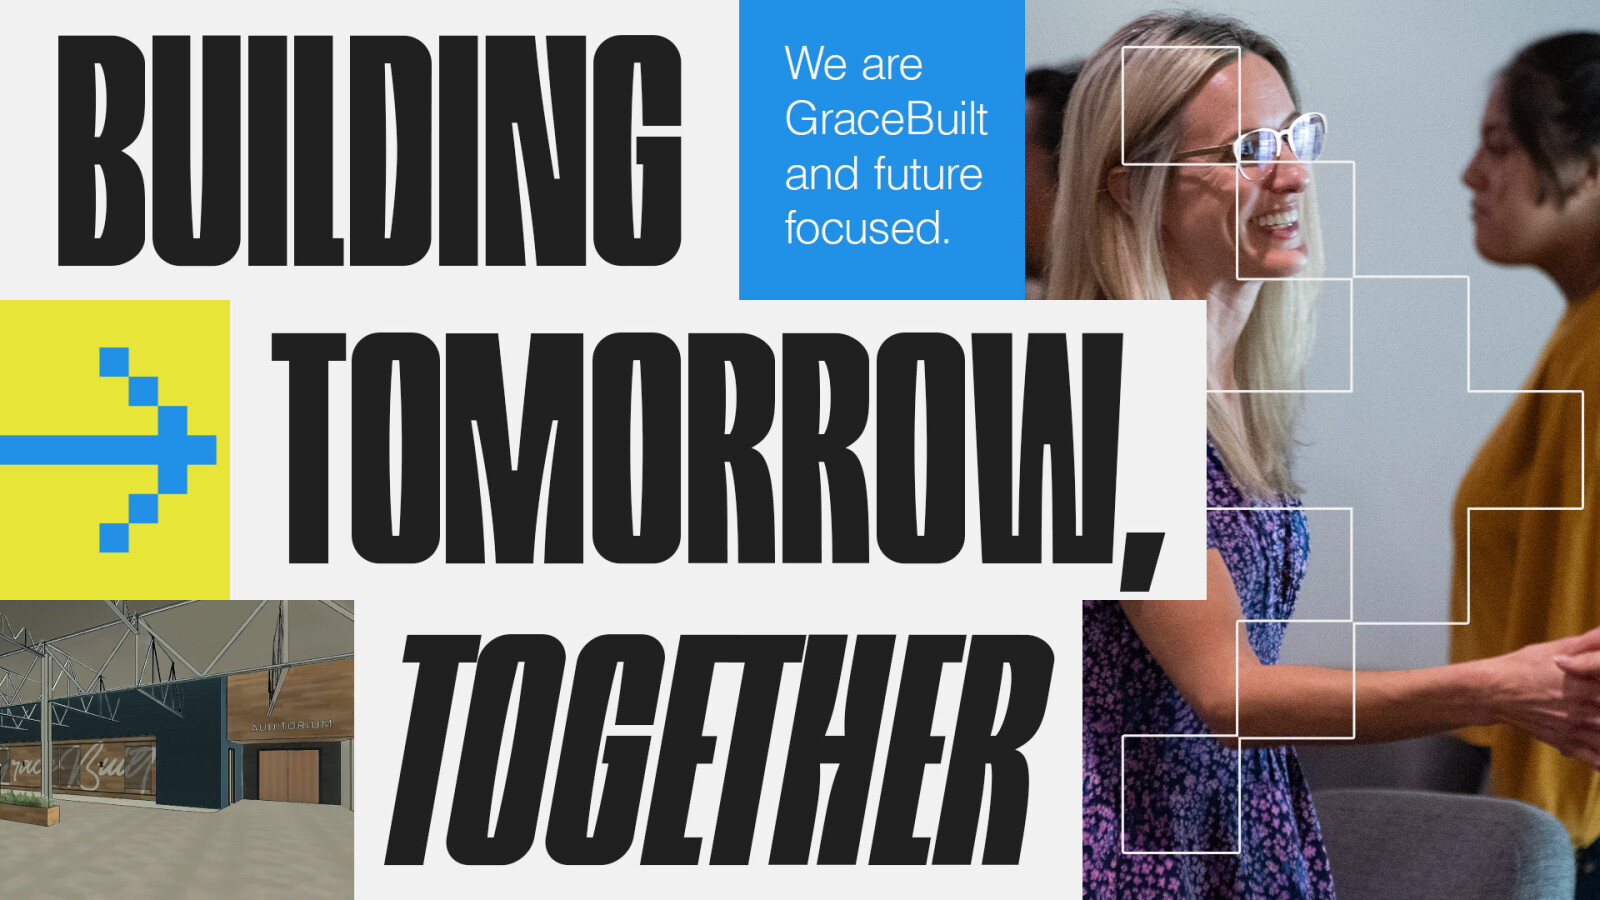 Building Tomorrow Together